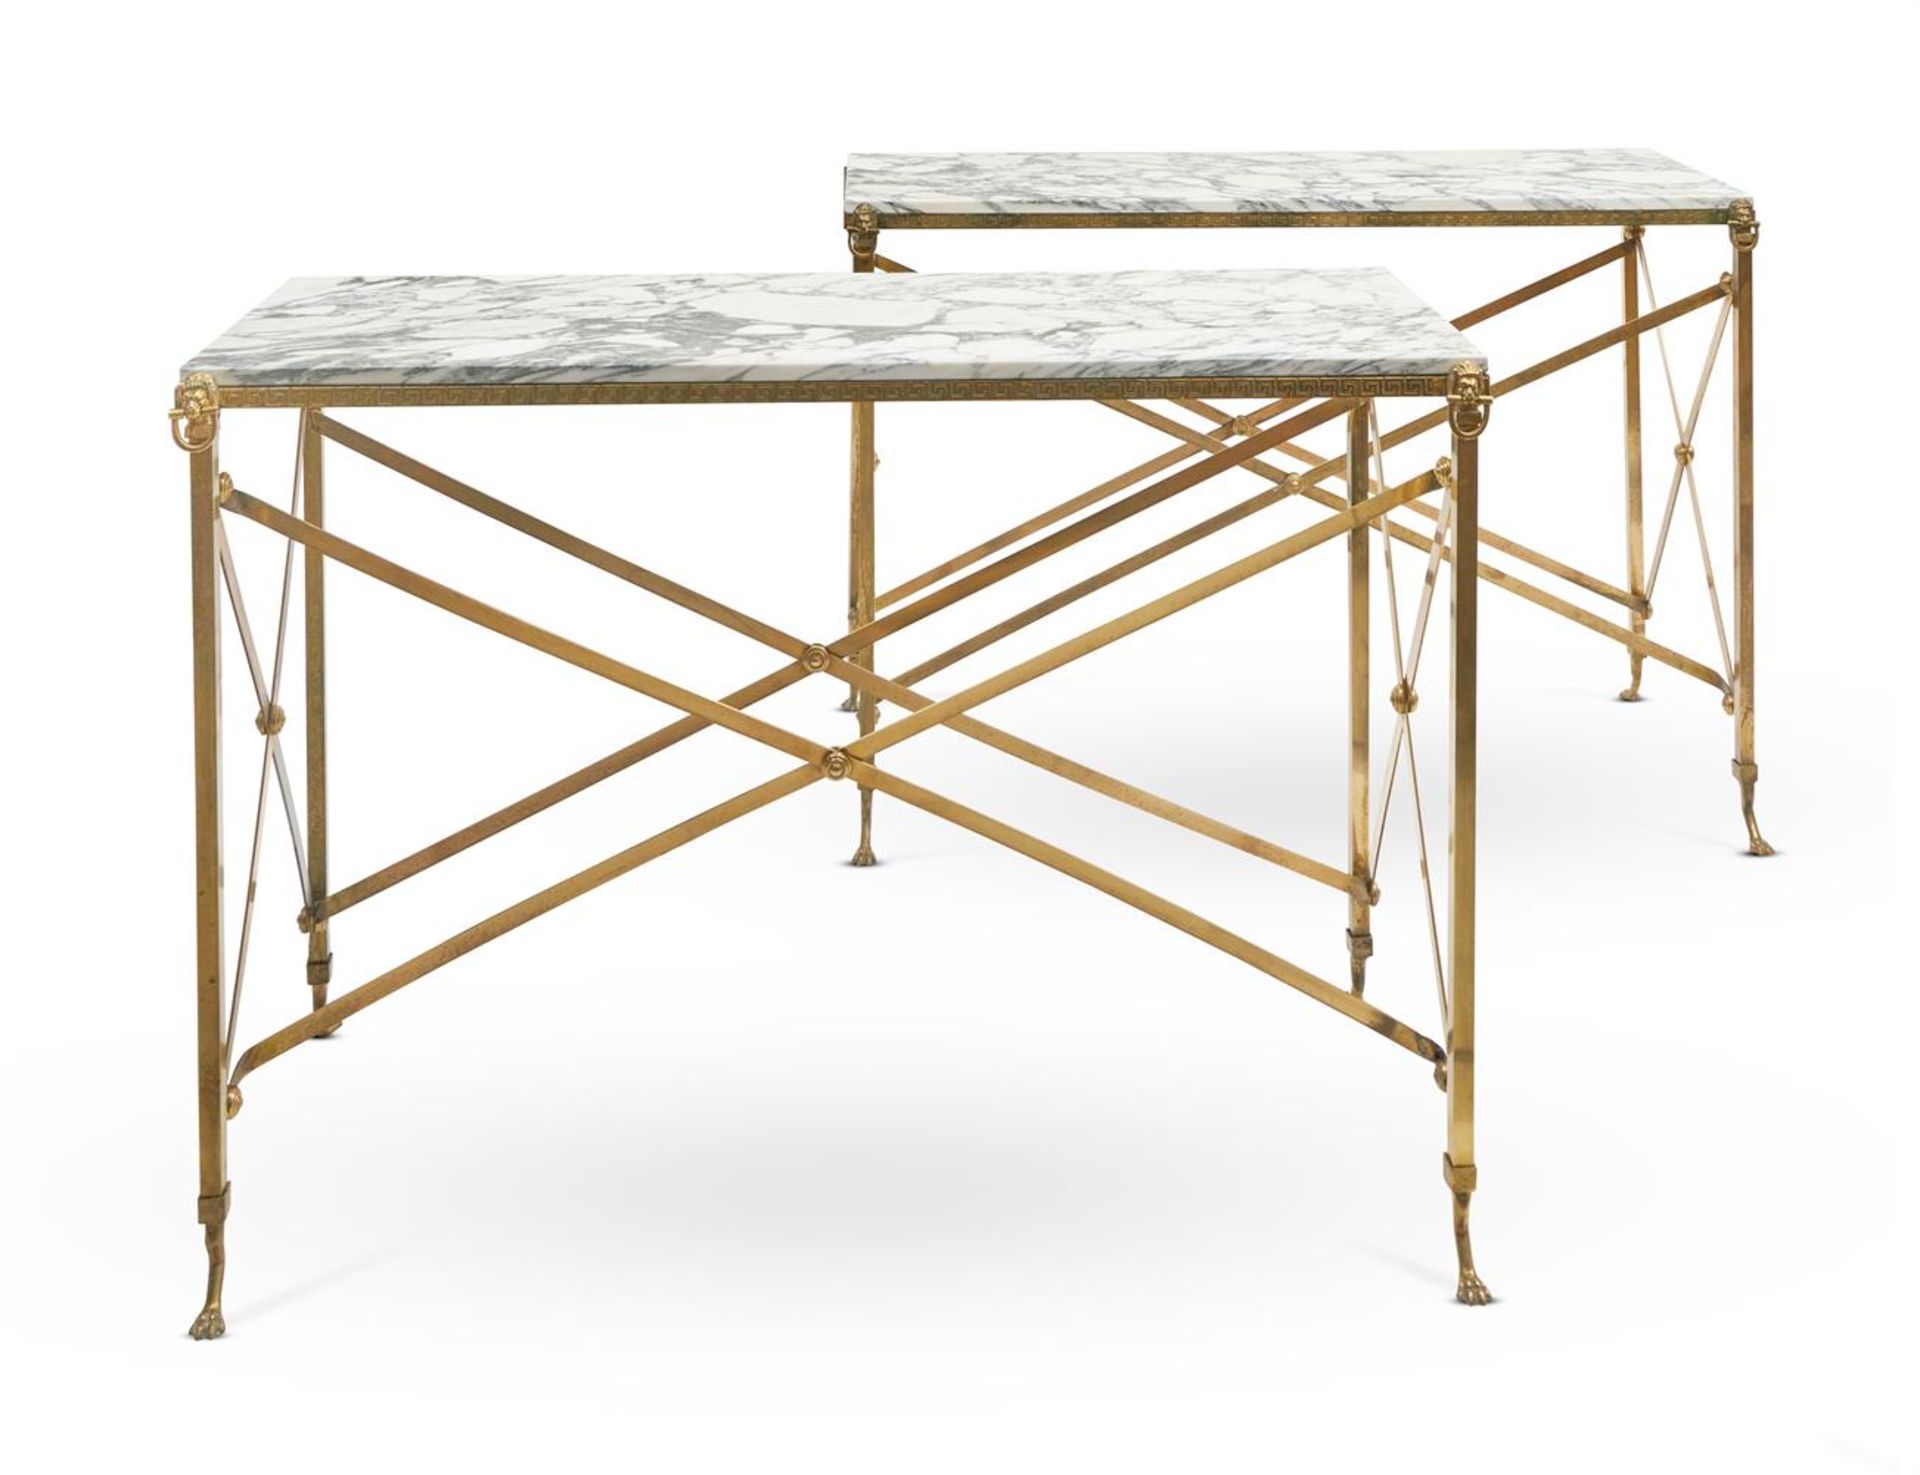 A PAIR OF GILT METAL RECTANGULAR CONSOLE TABLES IN CAMPAIGN STYLE ATTRIBUTED TO ERAIIS